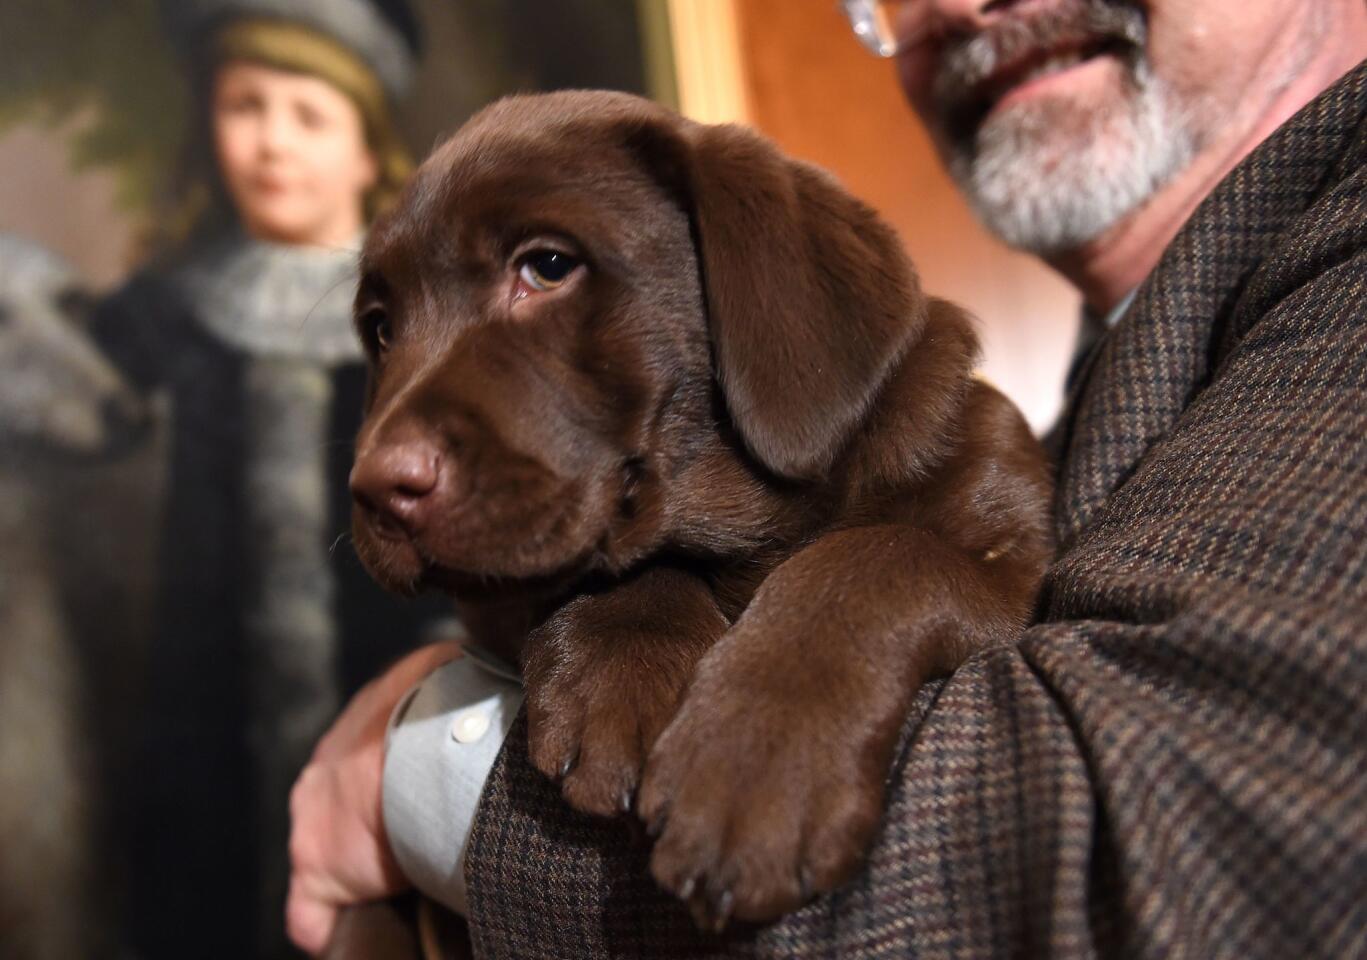 A Labrador retriever puppy is introduced to journalists at a news conference Feb. 22 in New York.